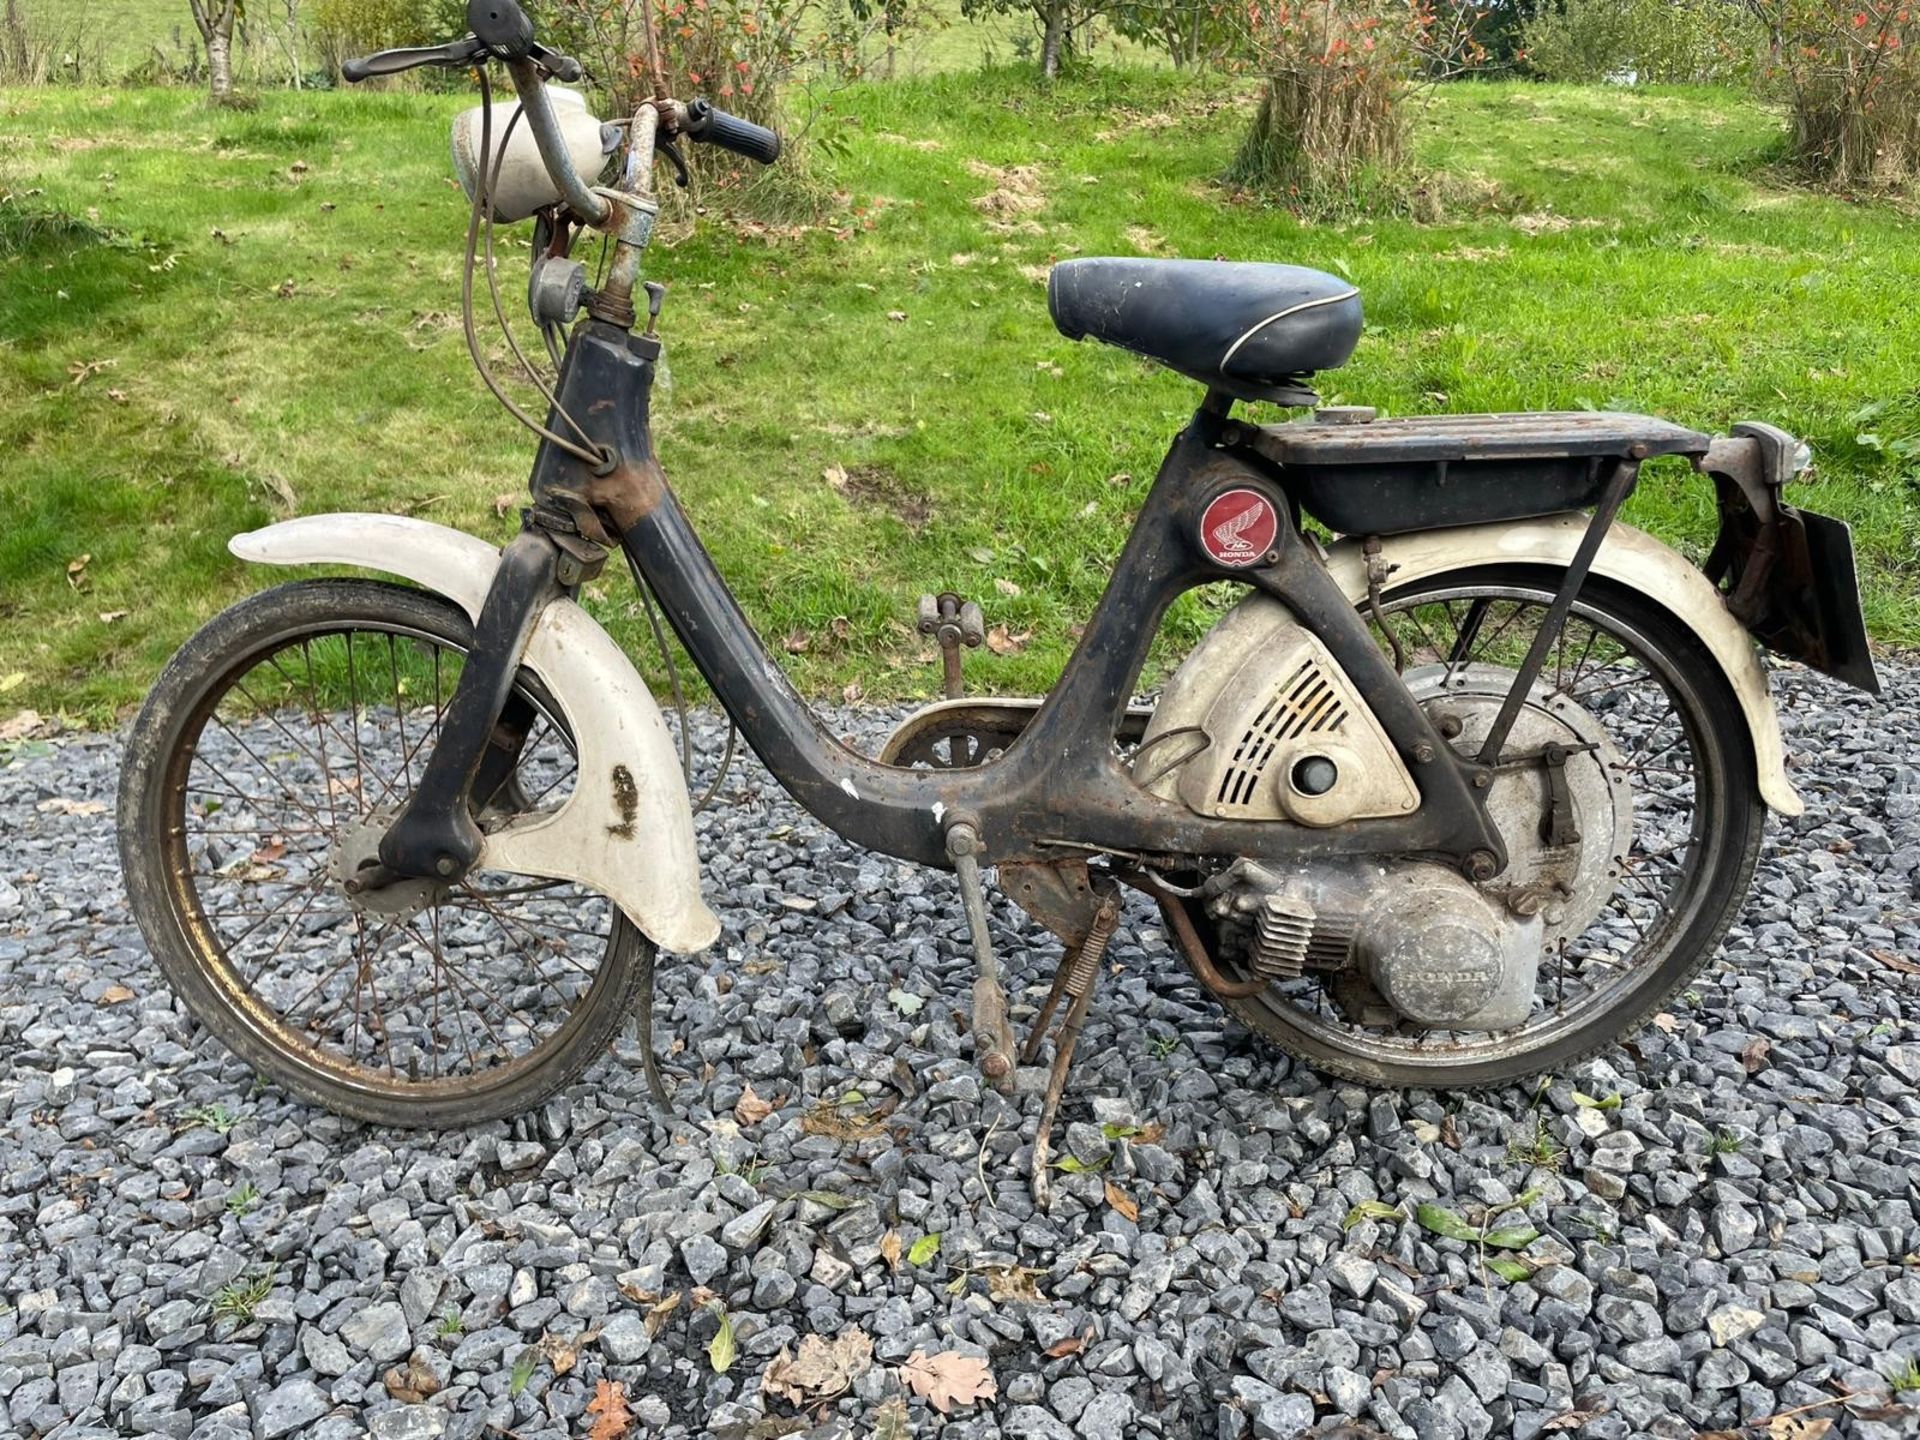 Honda PC50 moped project. Barn find. No docs. - Image 2 of 6